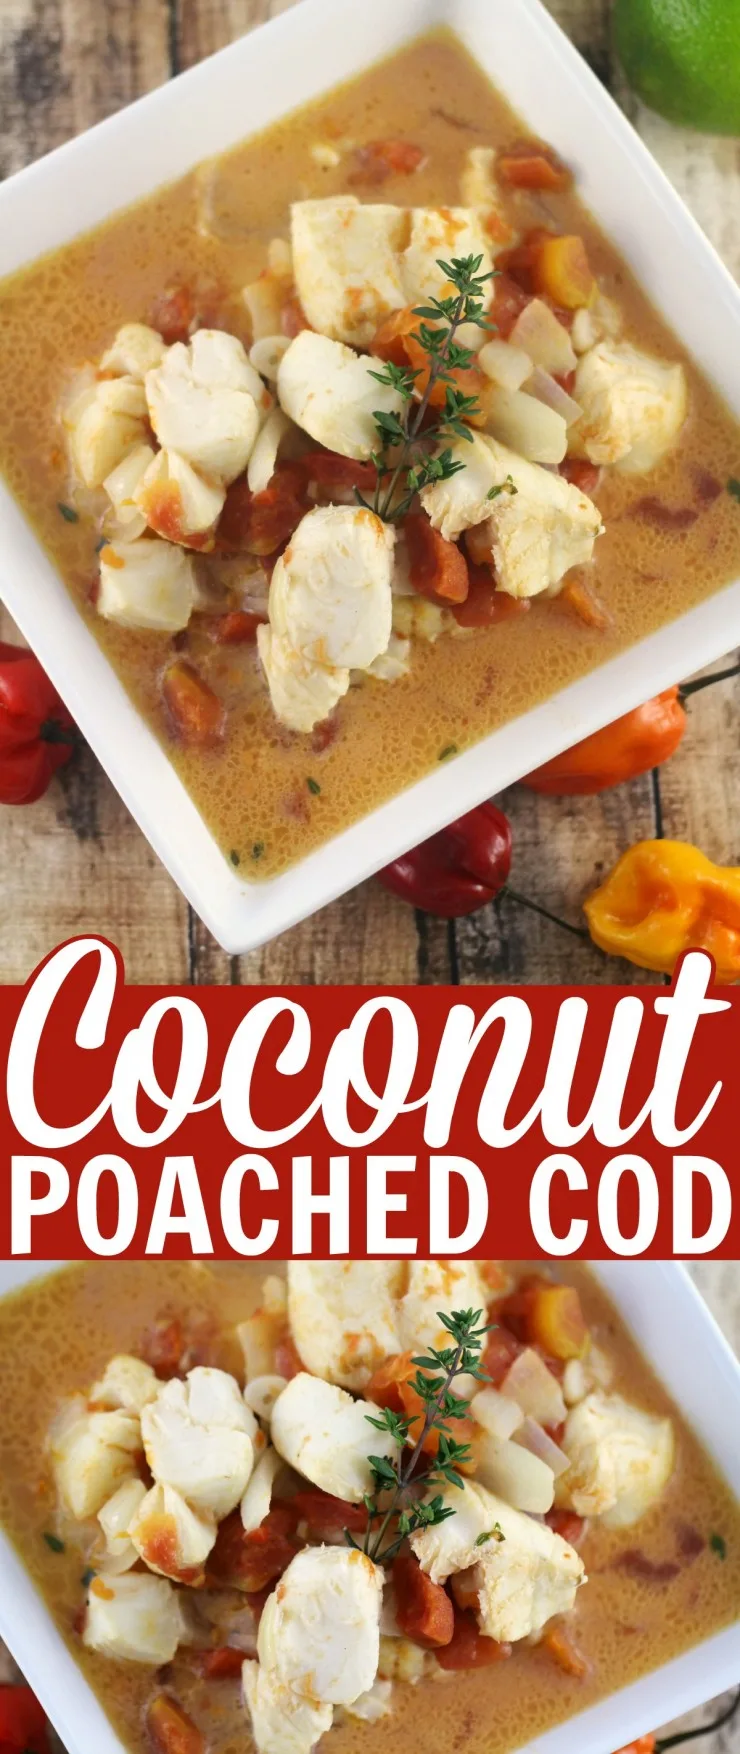 This coconut poached cod is inspired by Jamaican “Rundown” - Thai Kitchen Coconut Milk makes this recipe quick and easy-to-make.